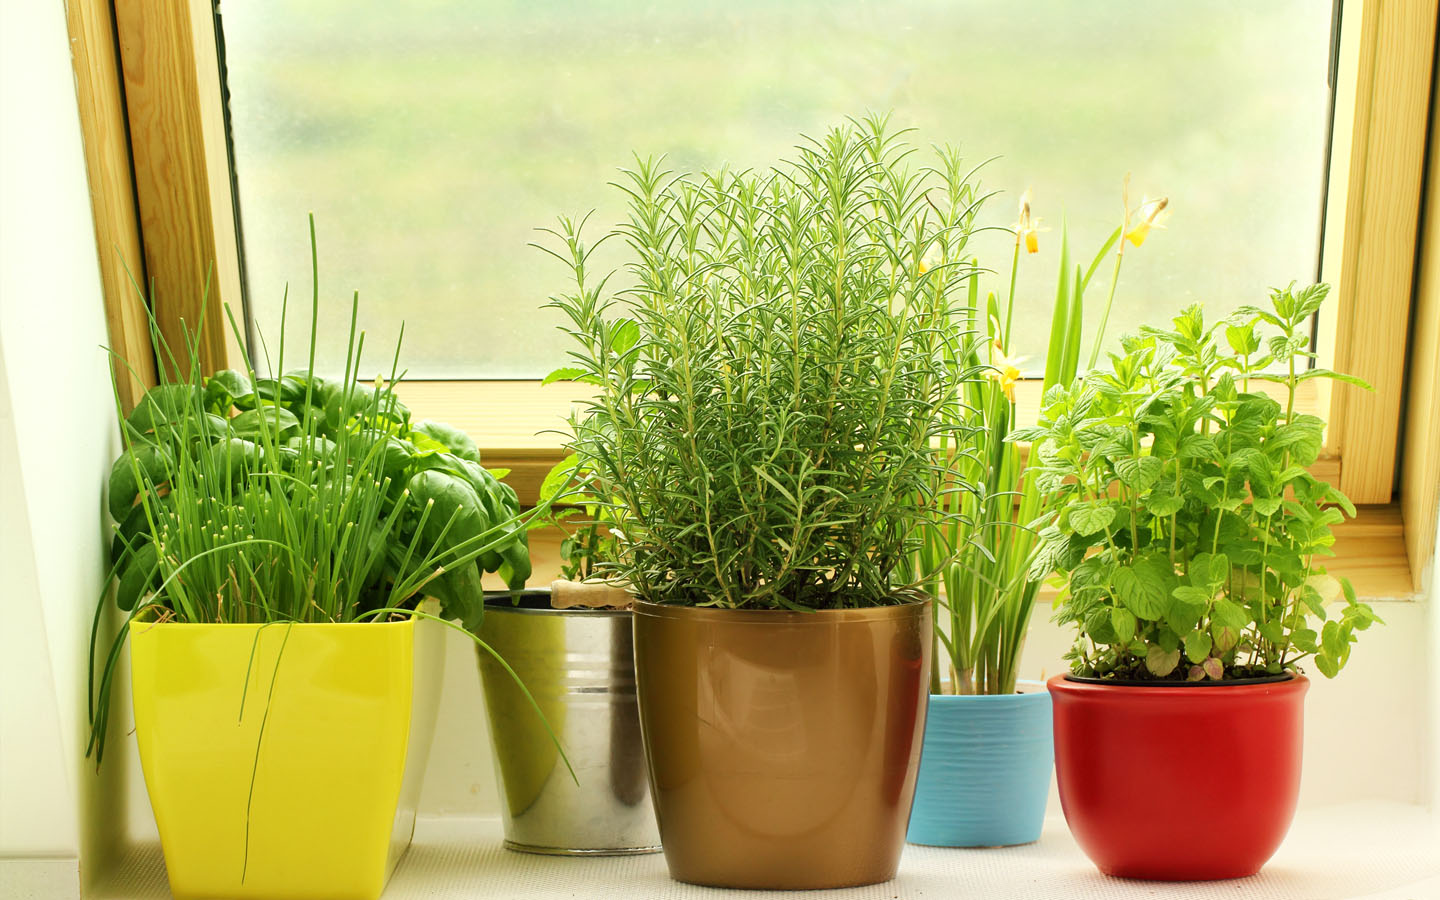 Growing herbs in small pots